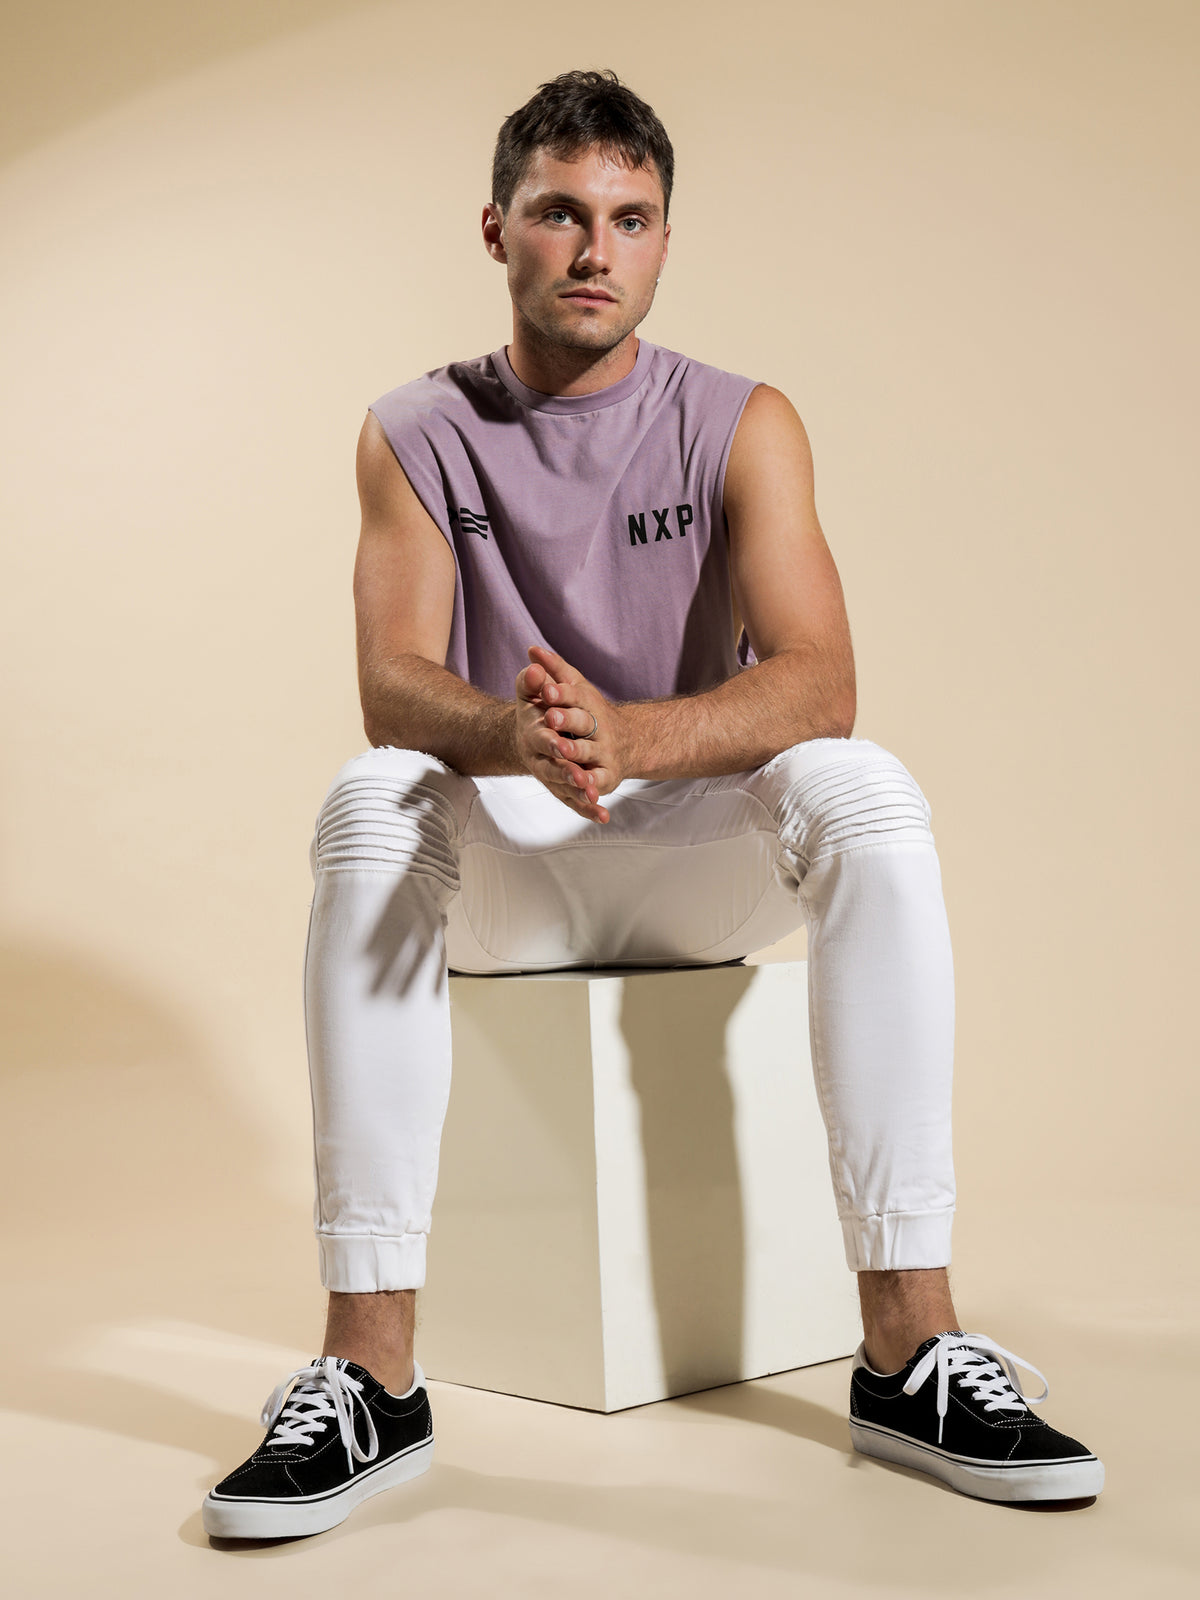 Decade Scoop Back Muscle T-Shirt in Pigment Lilac